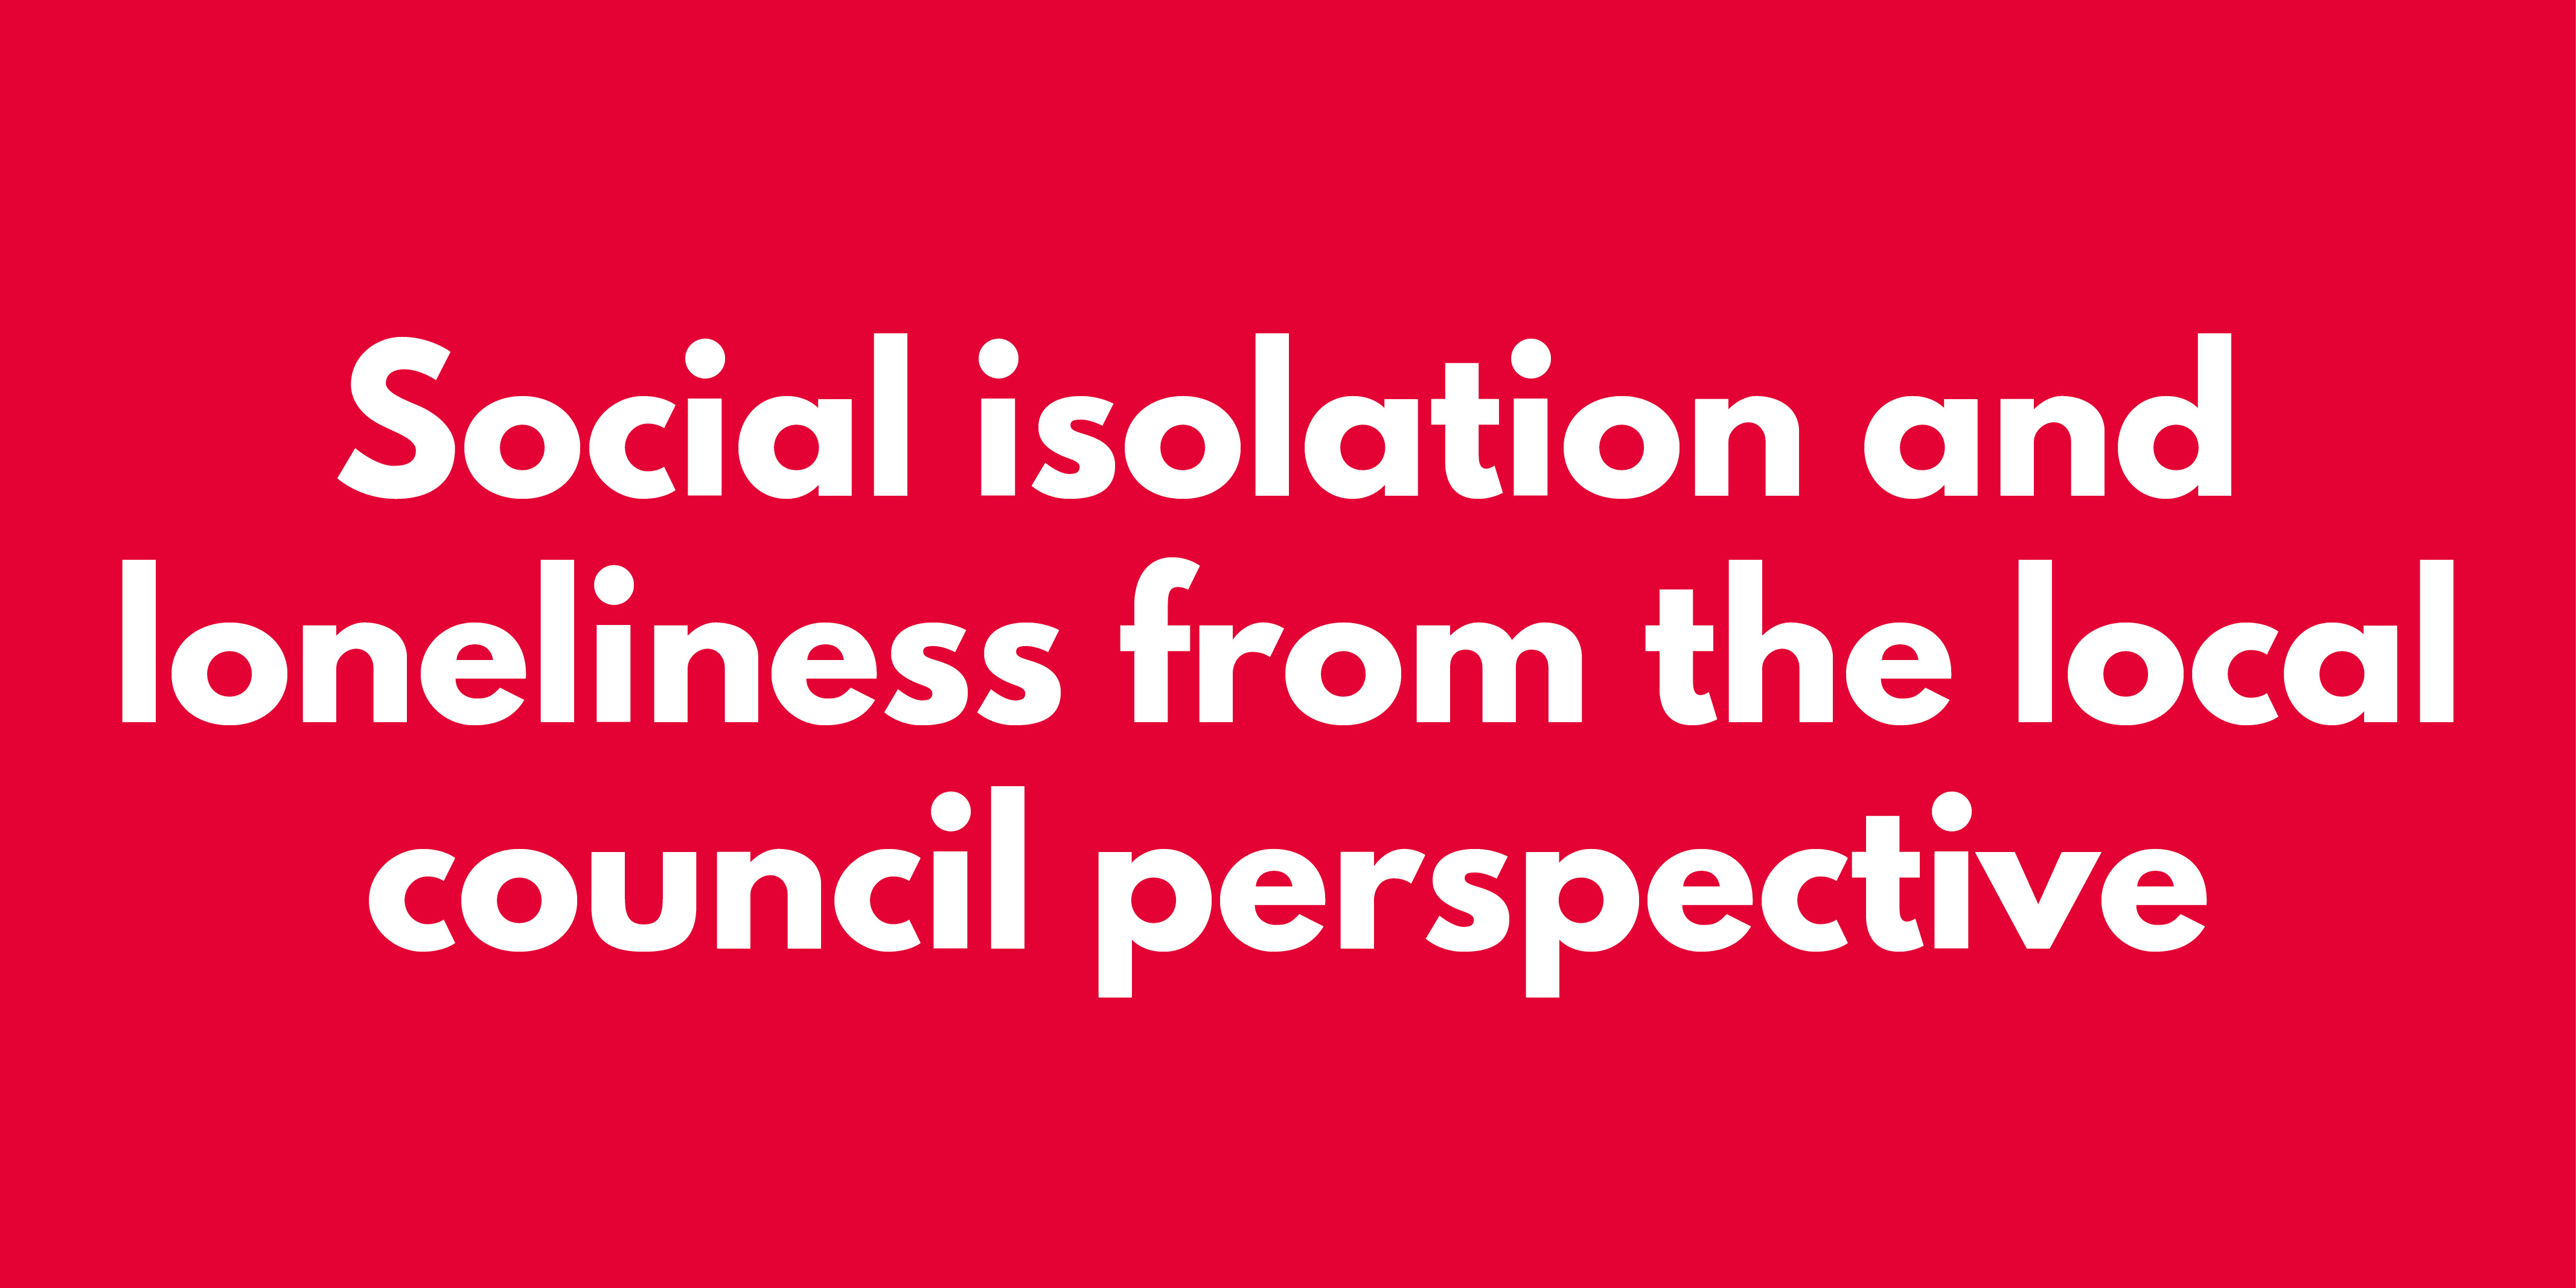 Social-isolation-and-loneliness-from-the-local-council-perspective